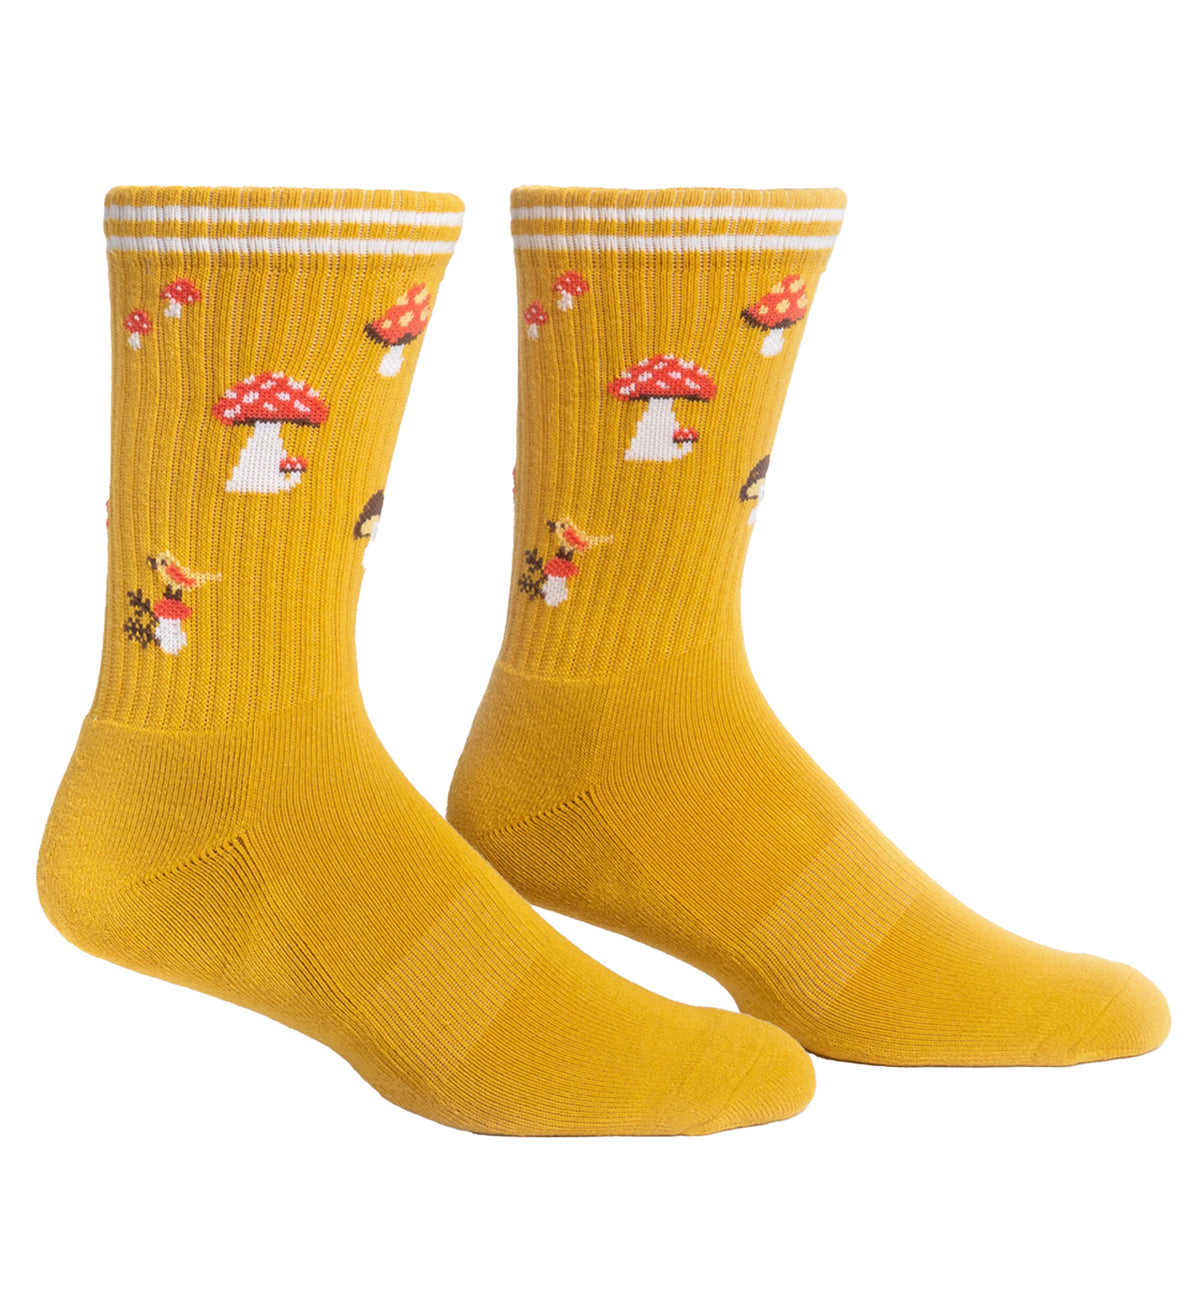 SOCK it to me Athletic Ribbed Crew Socks (R0012),Shrooms - Shrooms,One Size